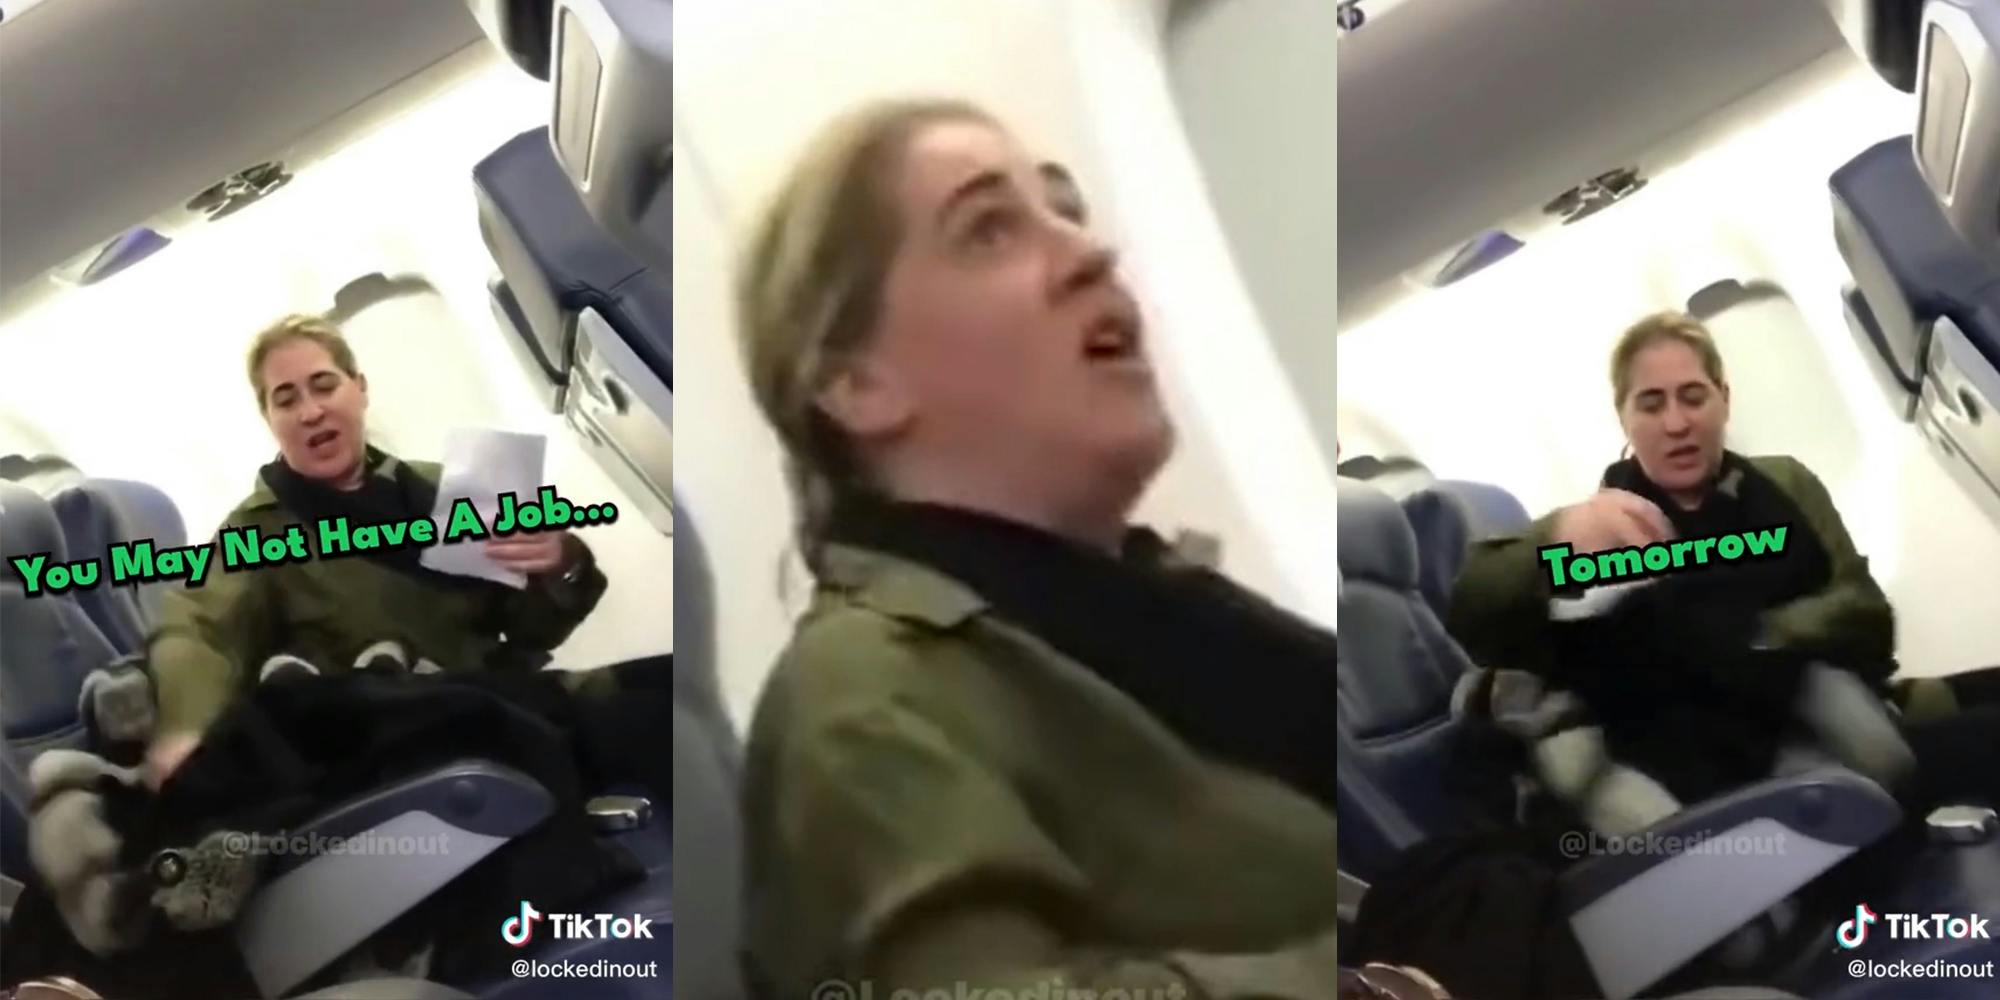 ‘I want this lady off the plane’: Karen gets kicked off flight after refusing to sit next to a baby